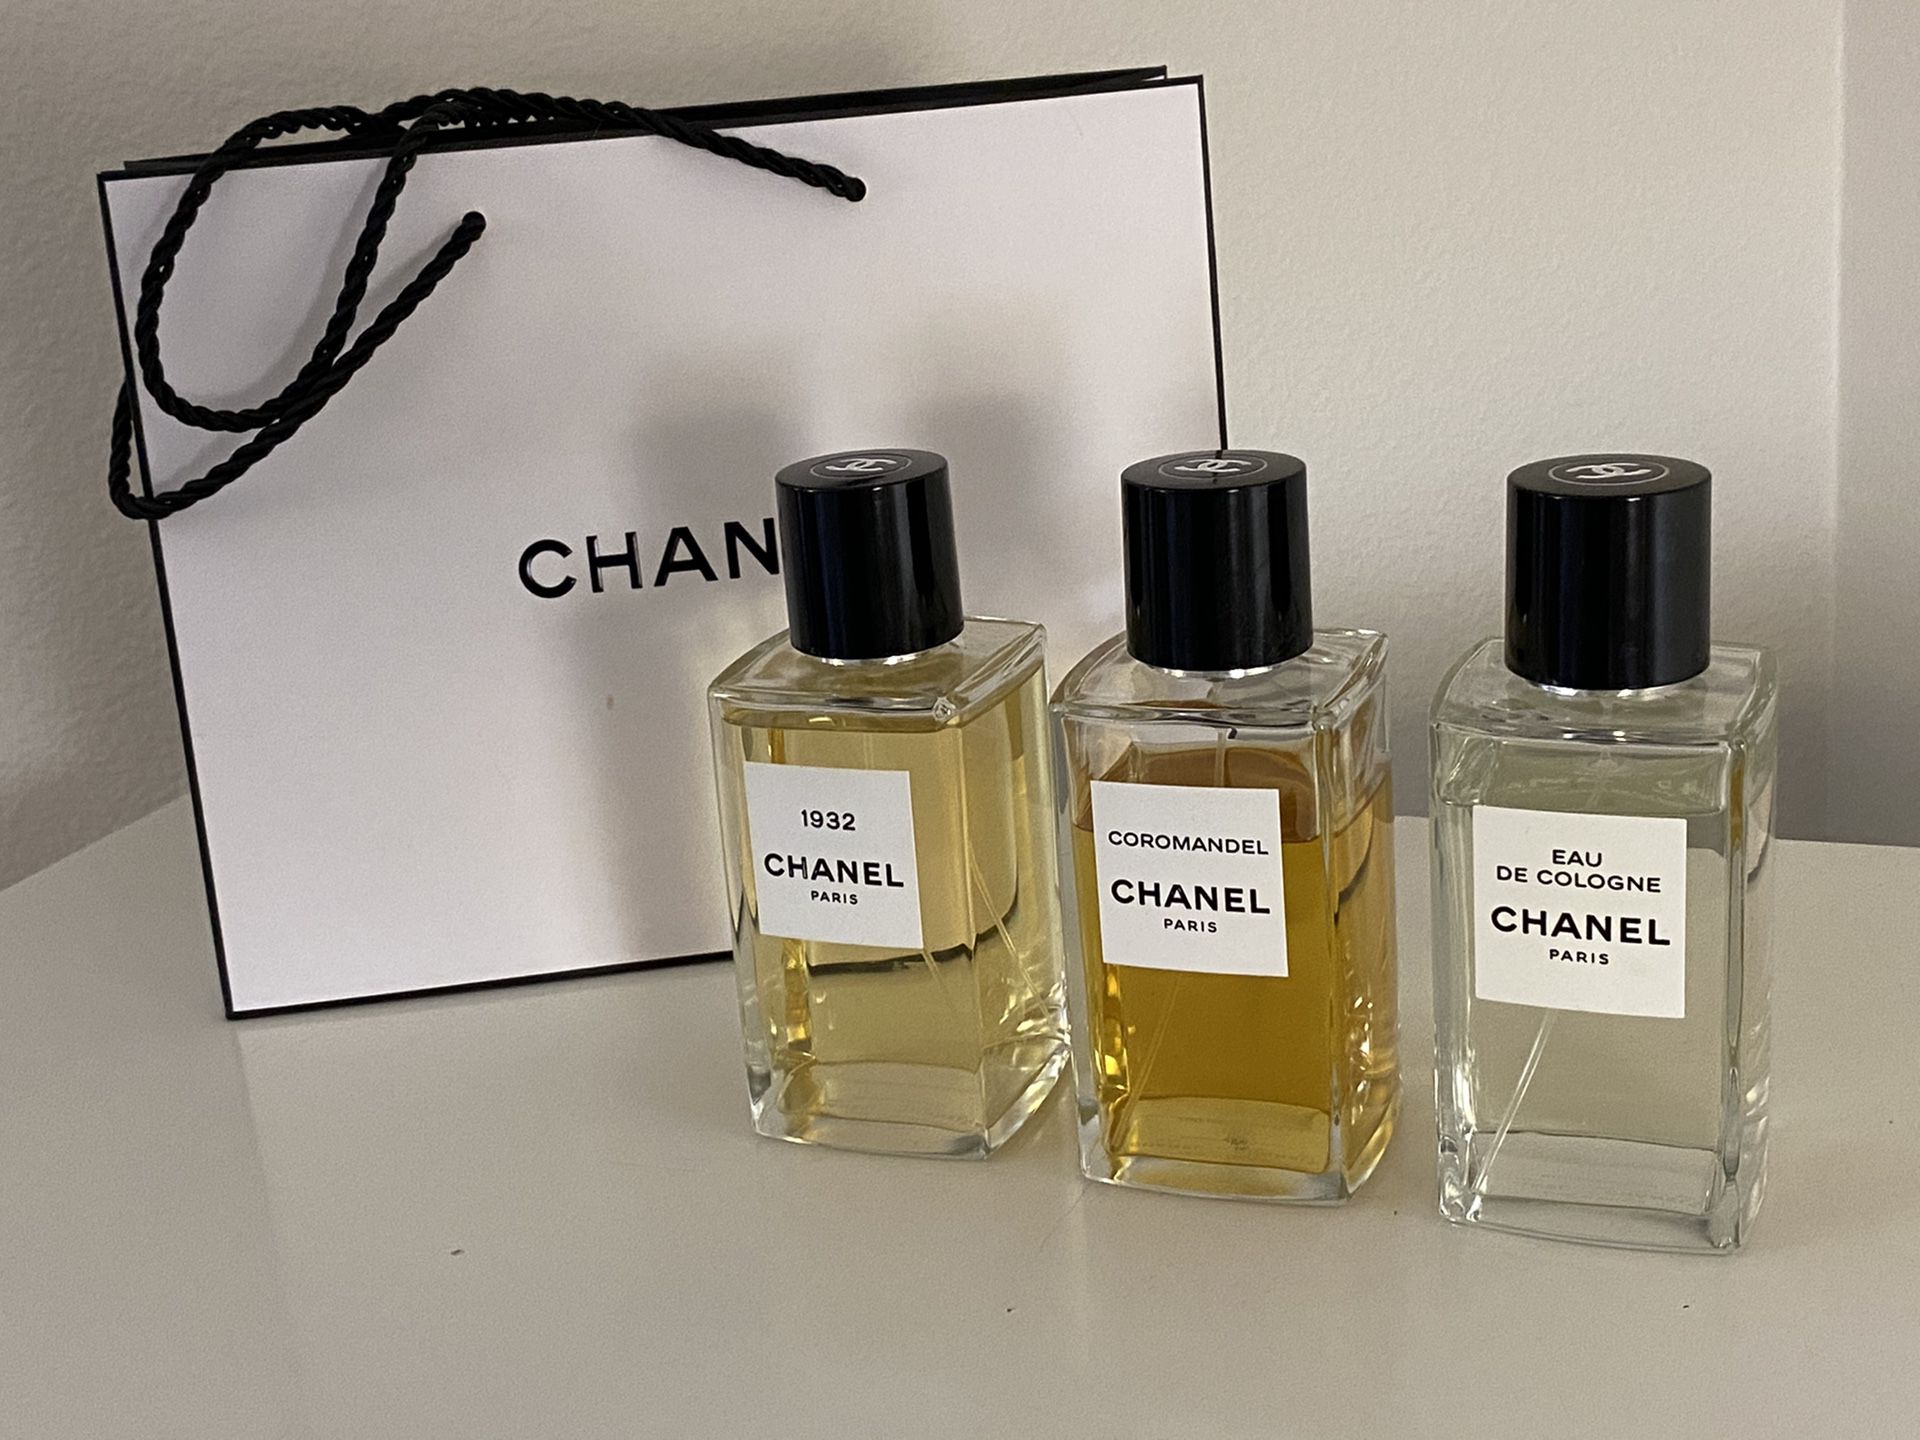 Chanel Les Exclusive Perfumes